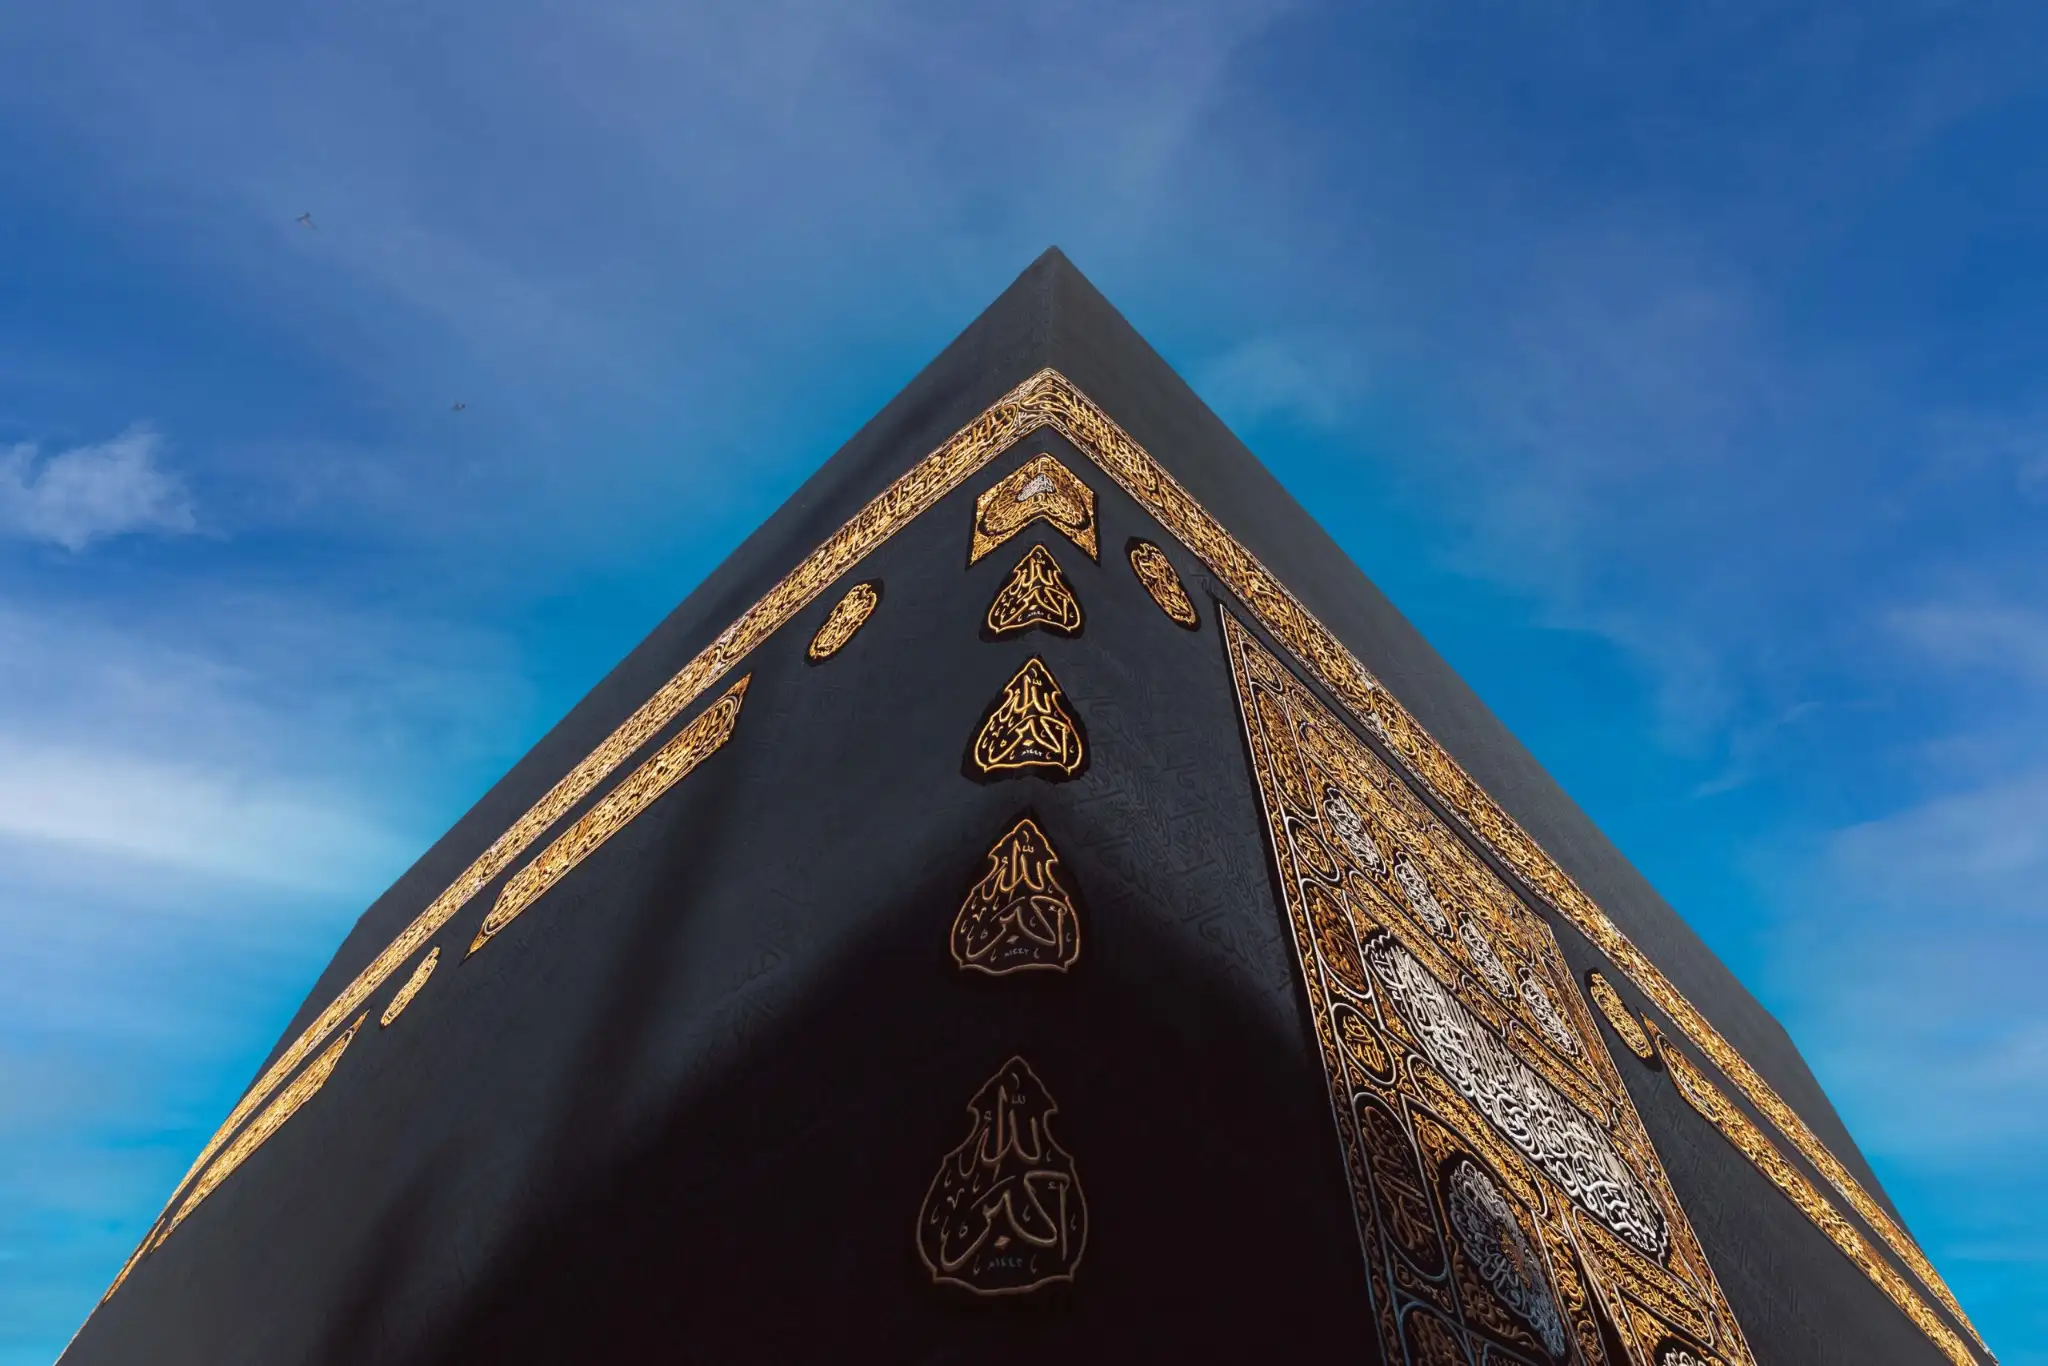 Where to Start with a DIY Umrah?